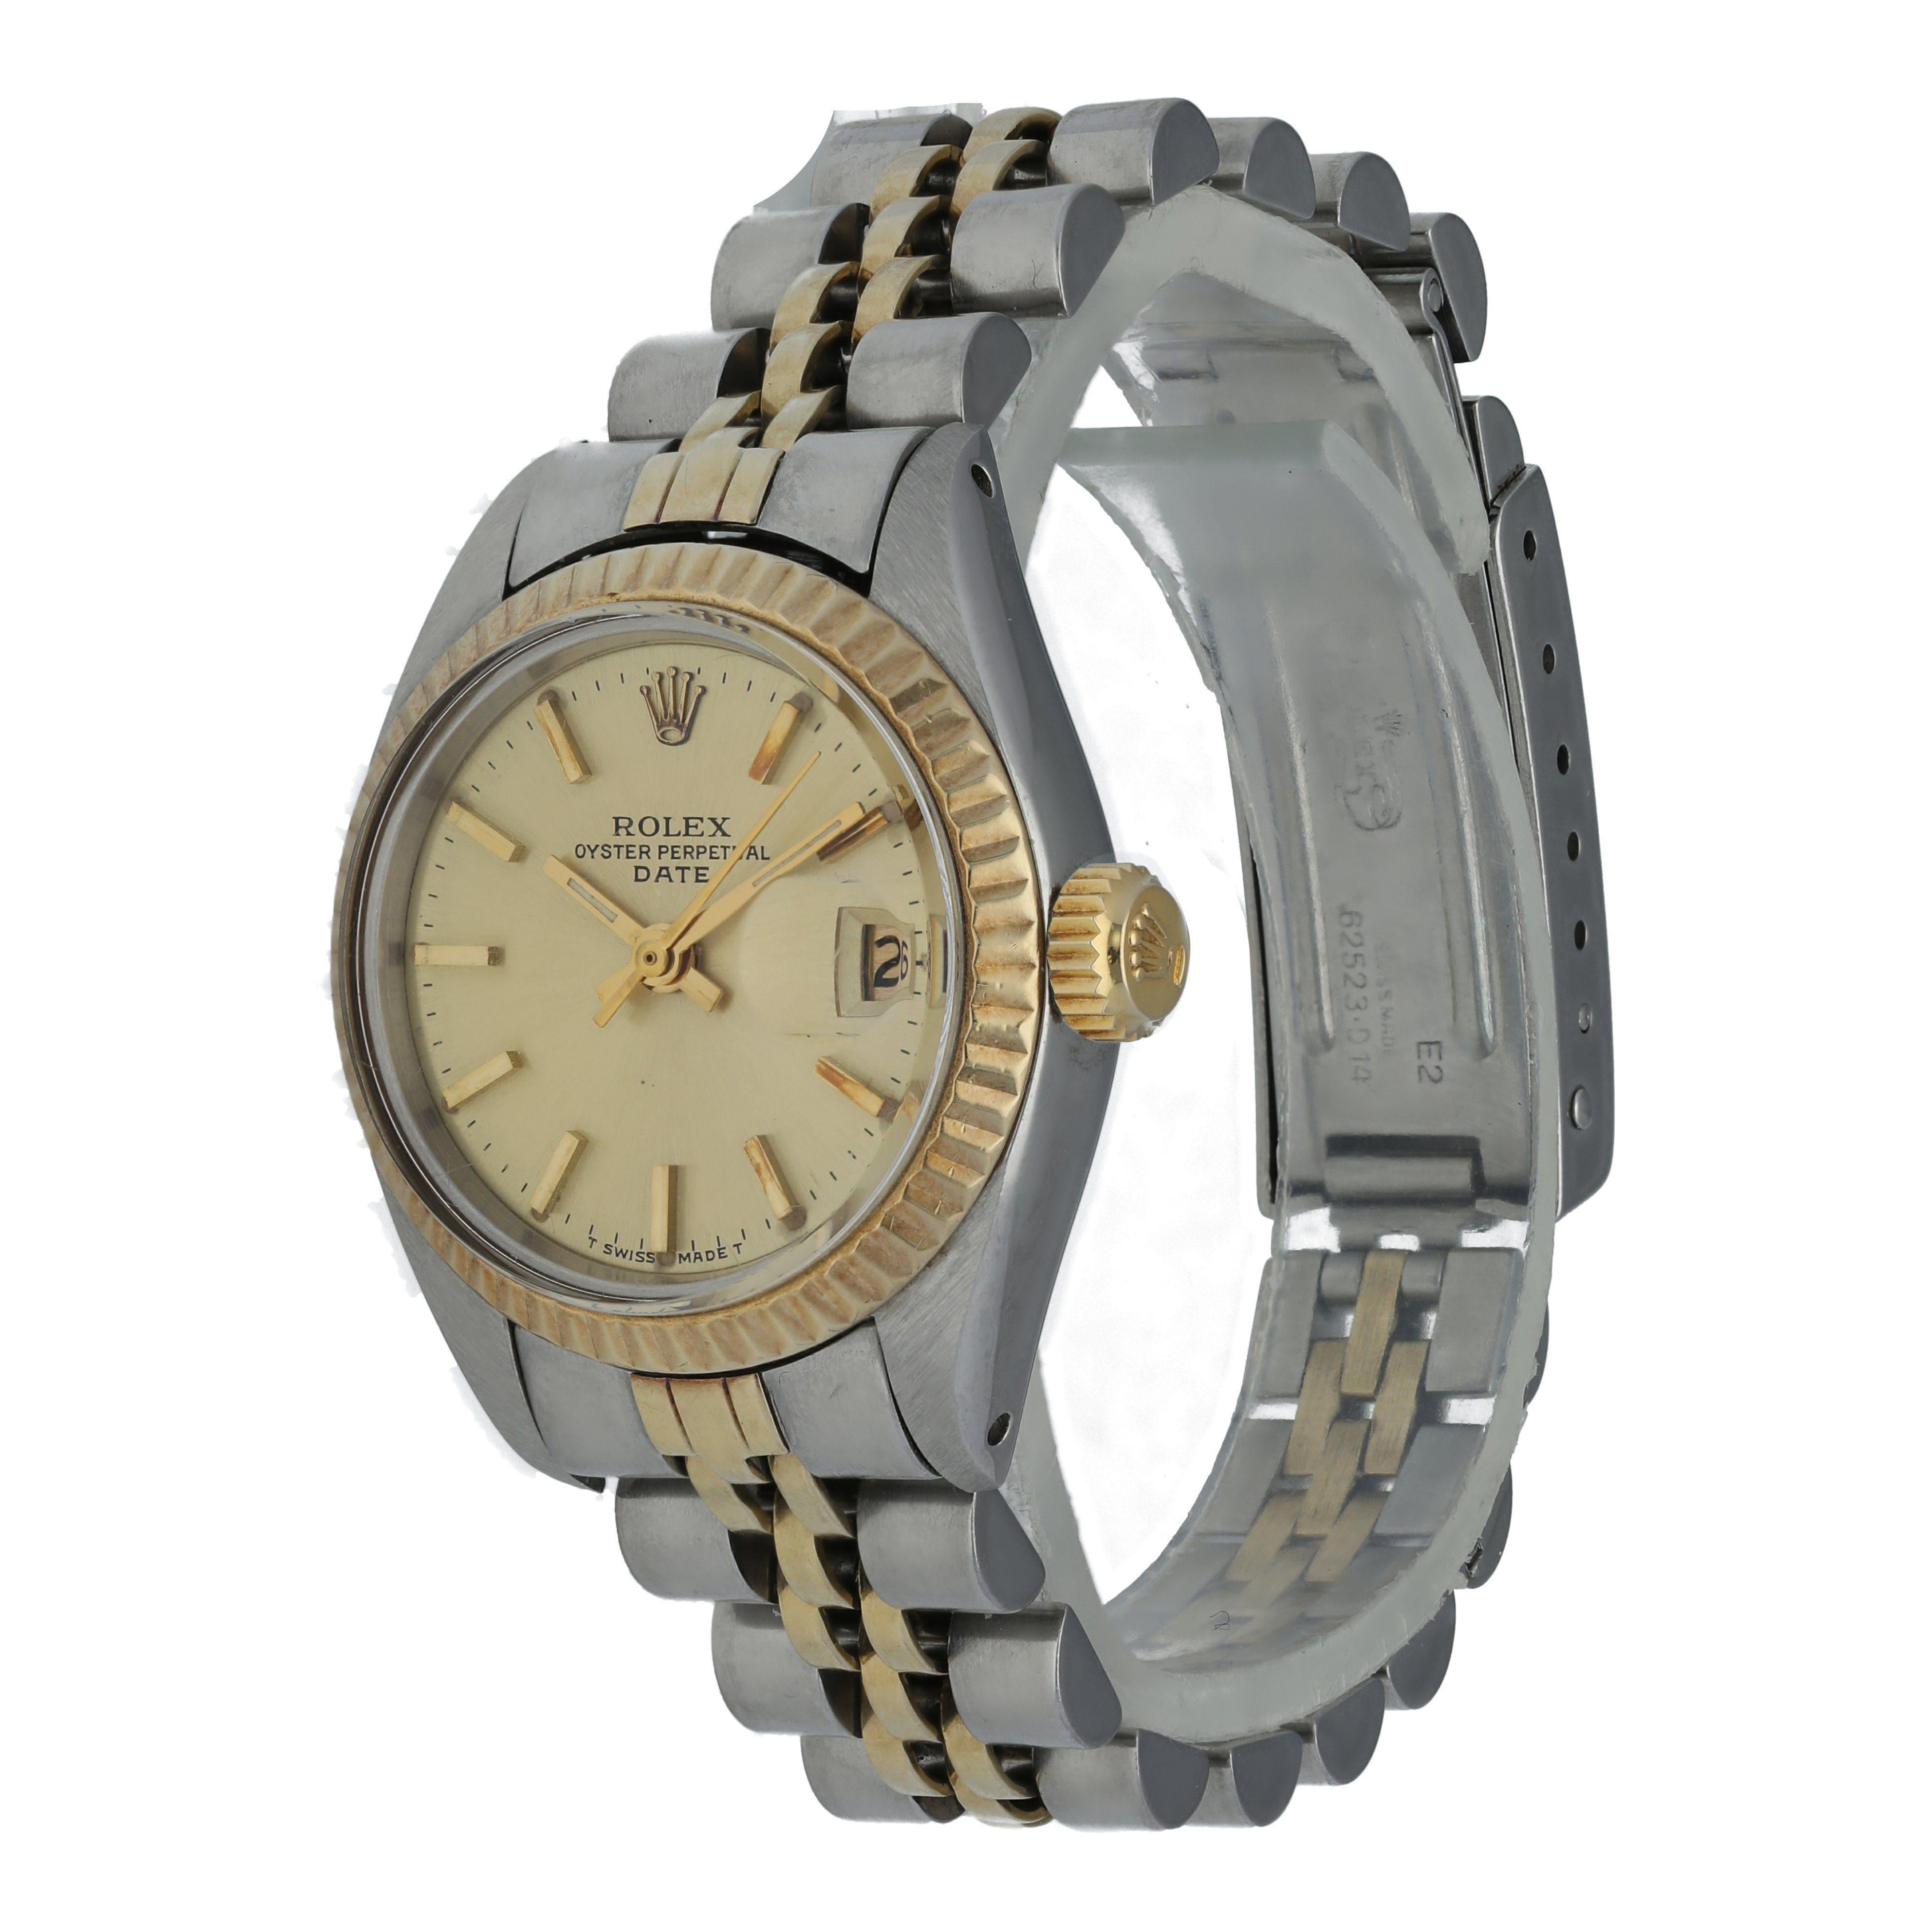 Rolex Oyster Perpetual Date 6917 Ladies Watch In Excellent Condition For Sale In New York, NY